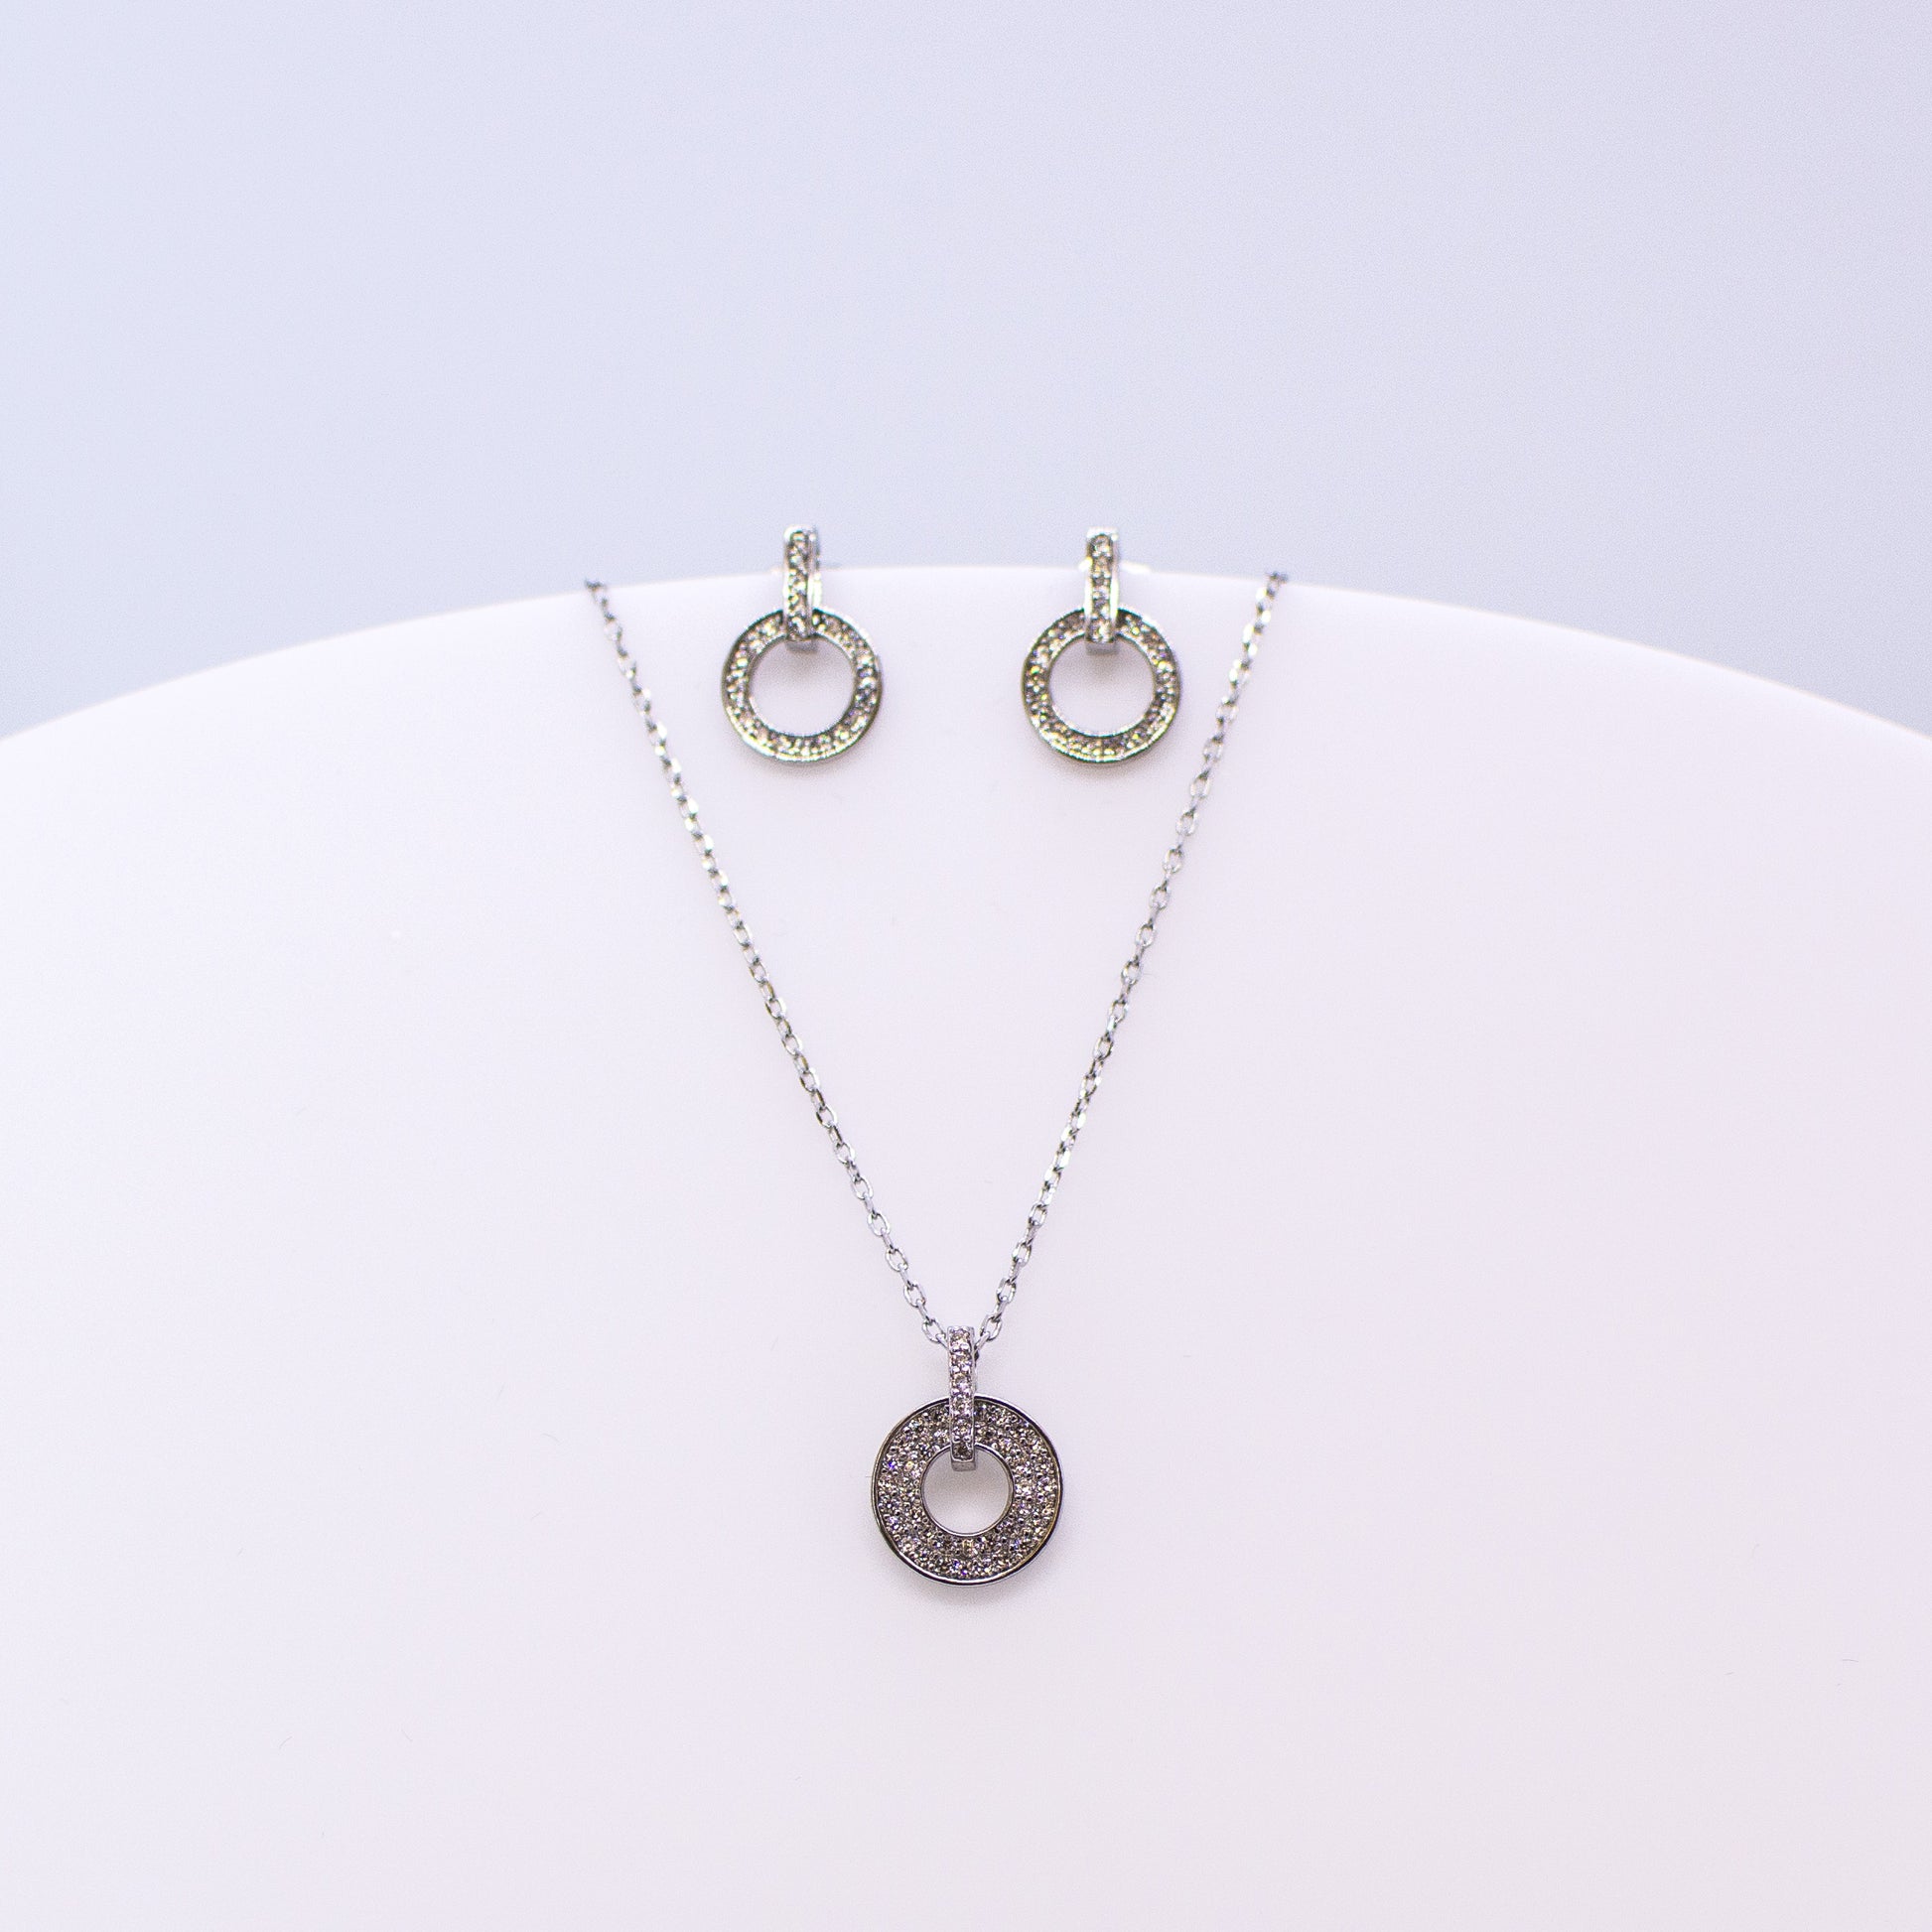 These sterling silver drop open circle stud earrings set with glittering cubic zirconia stones accompanied by the matching necklace are the perfect addition to any outfit. Product details: Product materials: 925 sterling silver, cubic zirconia Pendant dimensions:  13.5mm L x 10mm W Chain length: 44cm inch fine diamond cut curb chain Earring dimensions:  13mm L x 8.5mm W Stud earrings with butterfly backs.